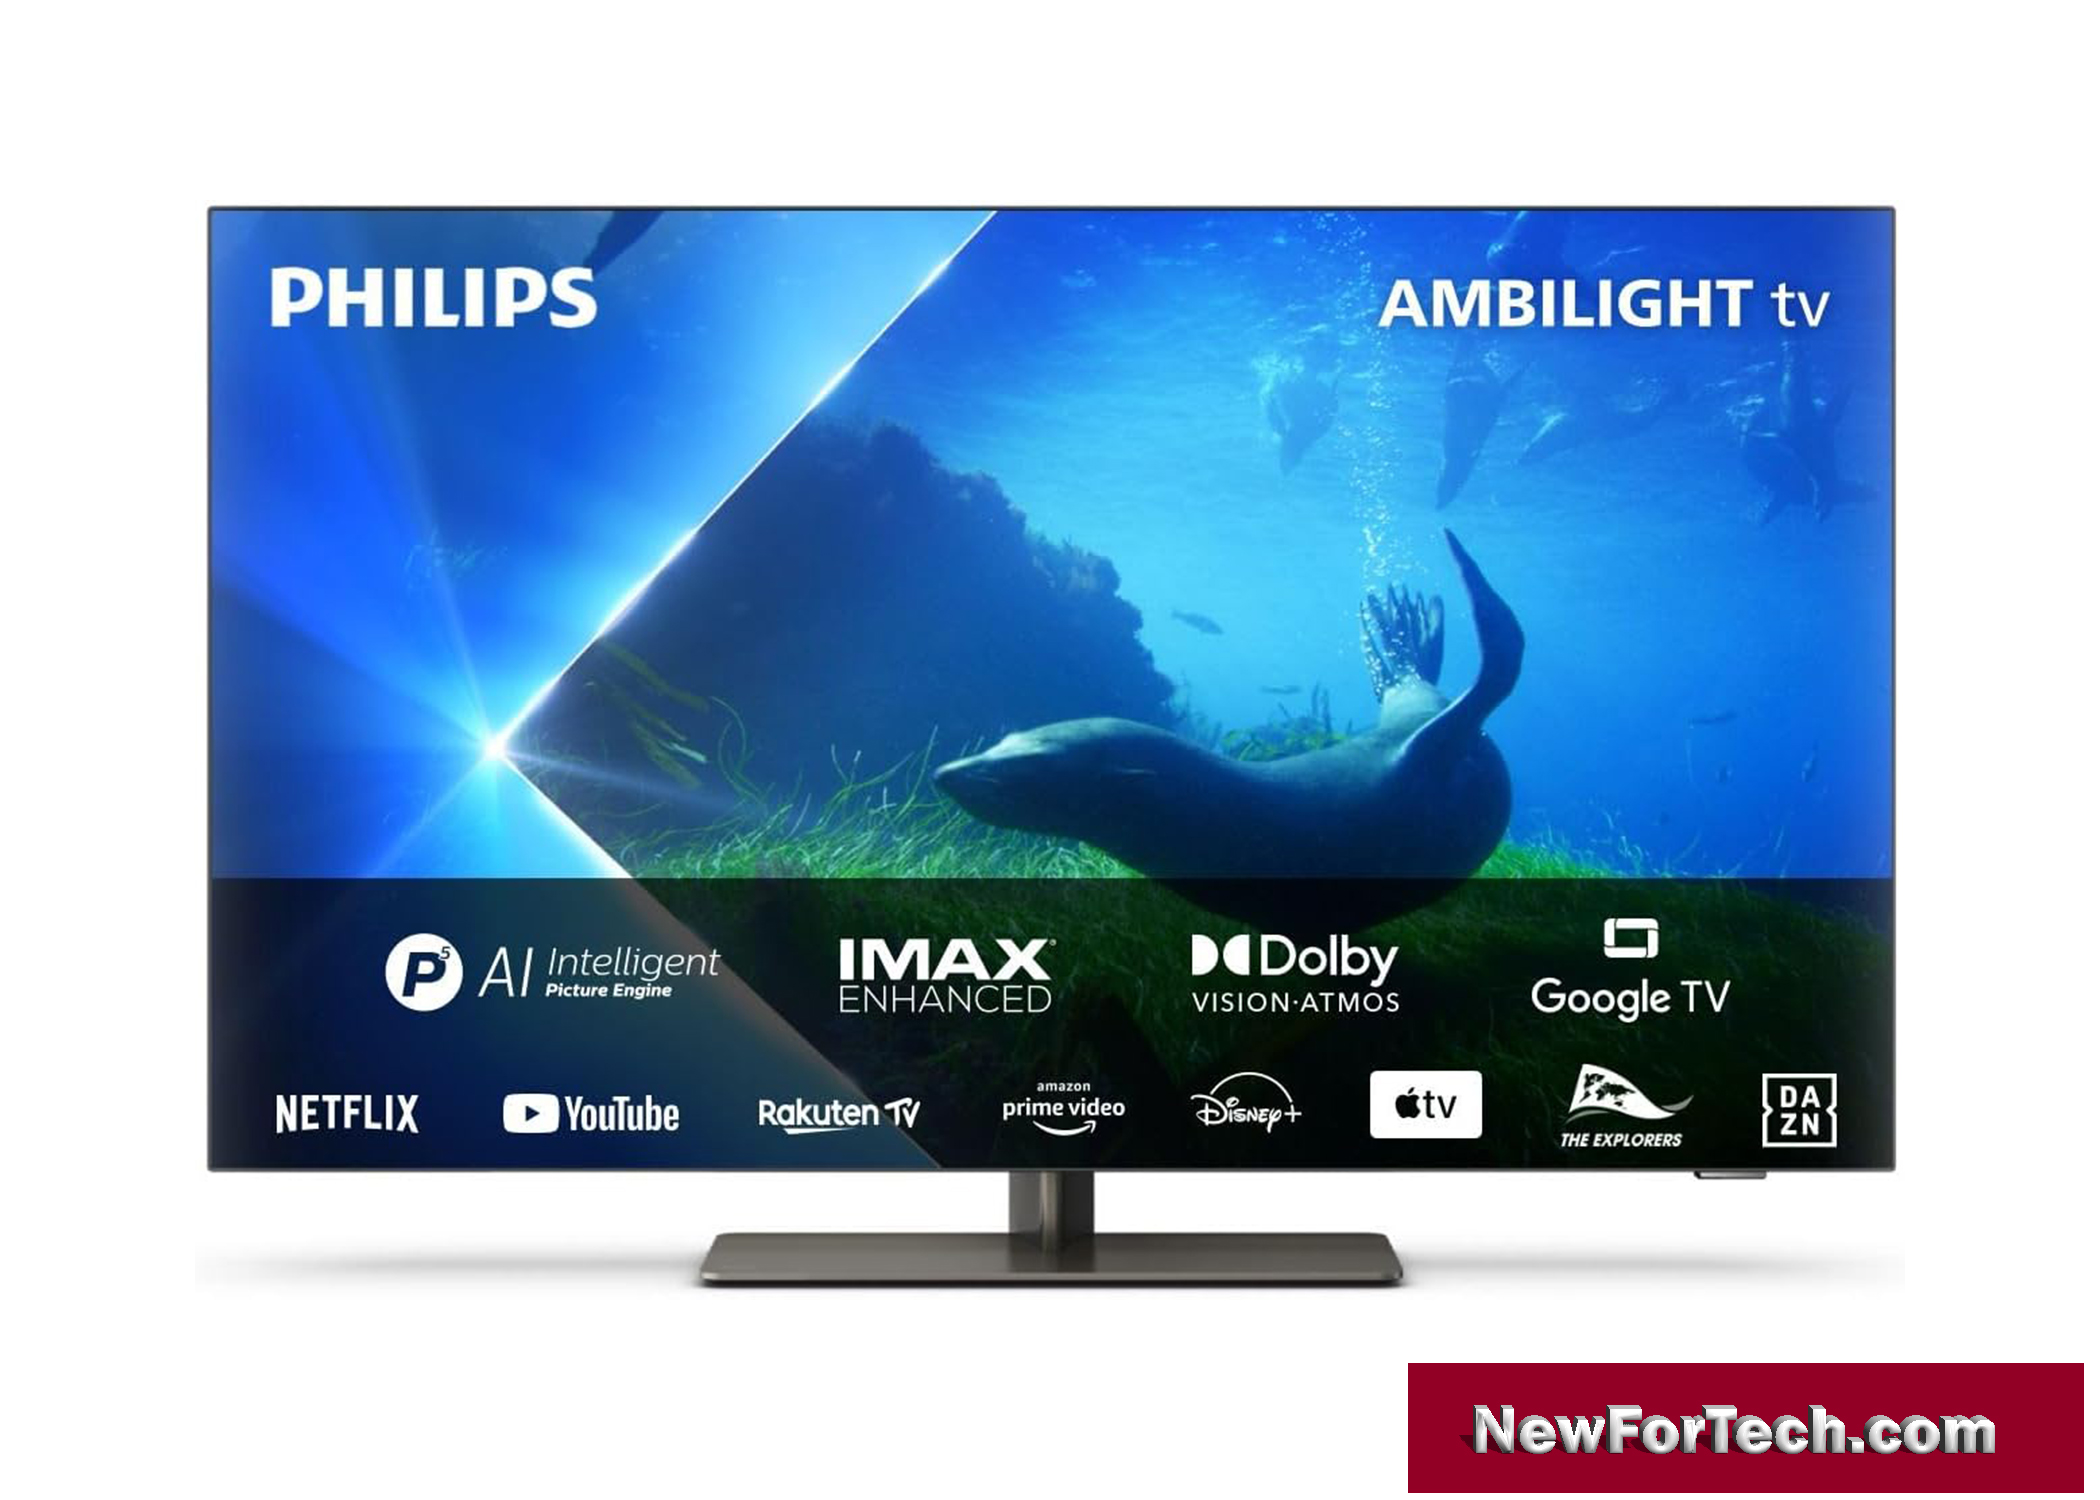 Philips OLED808 TV: A Rivalry with Ambilight & Immersive Viewing